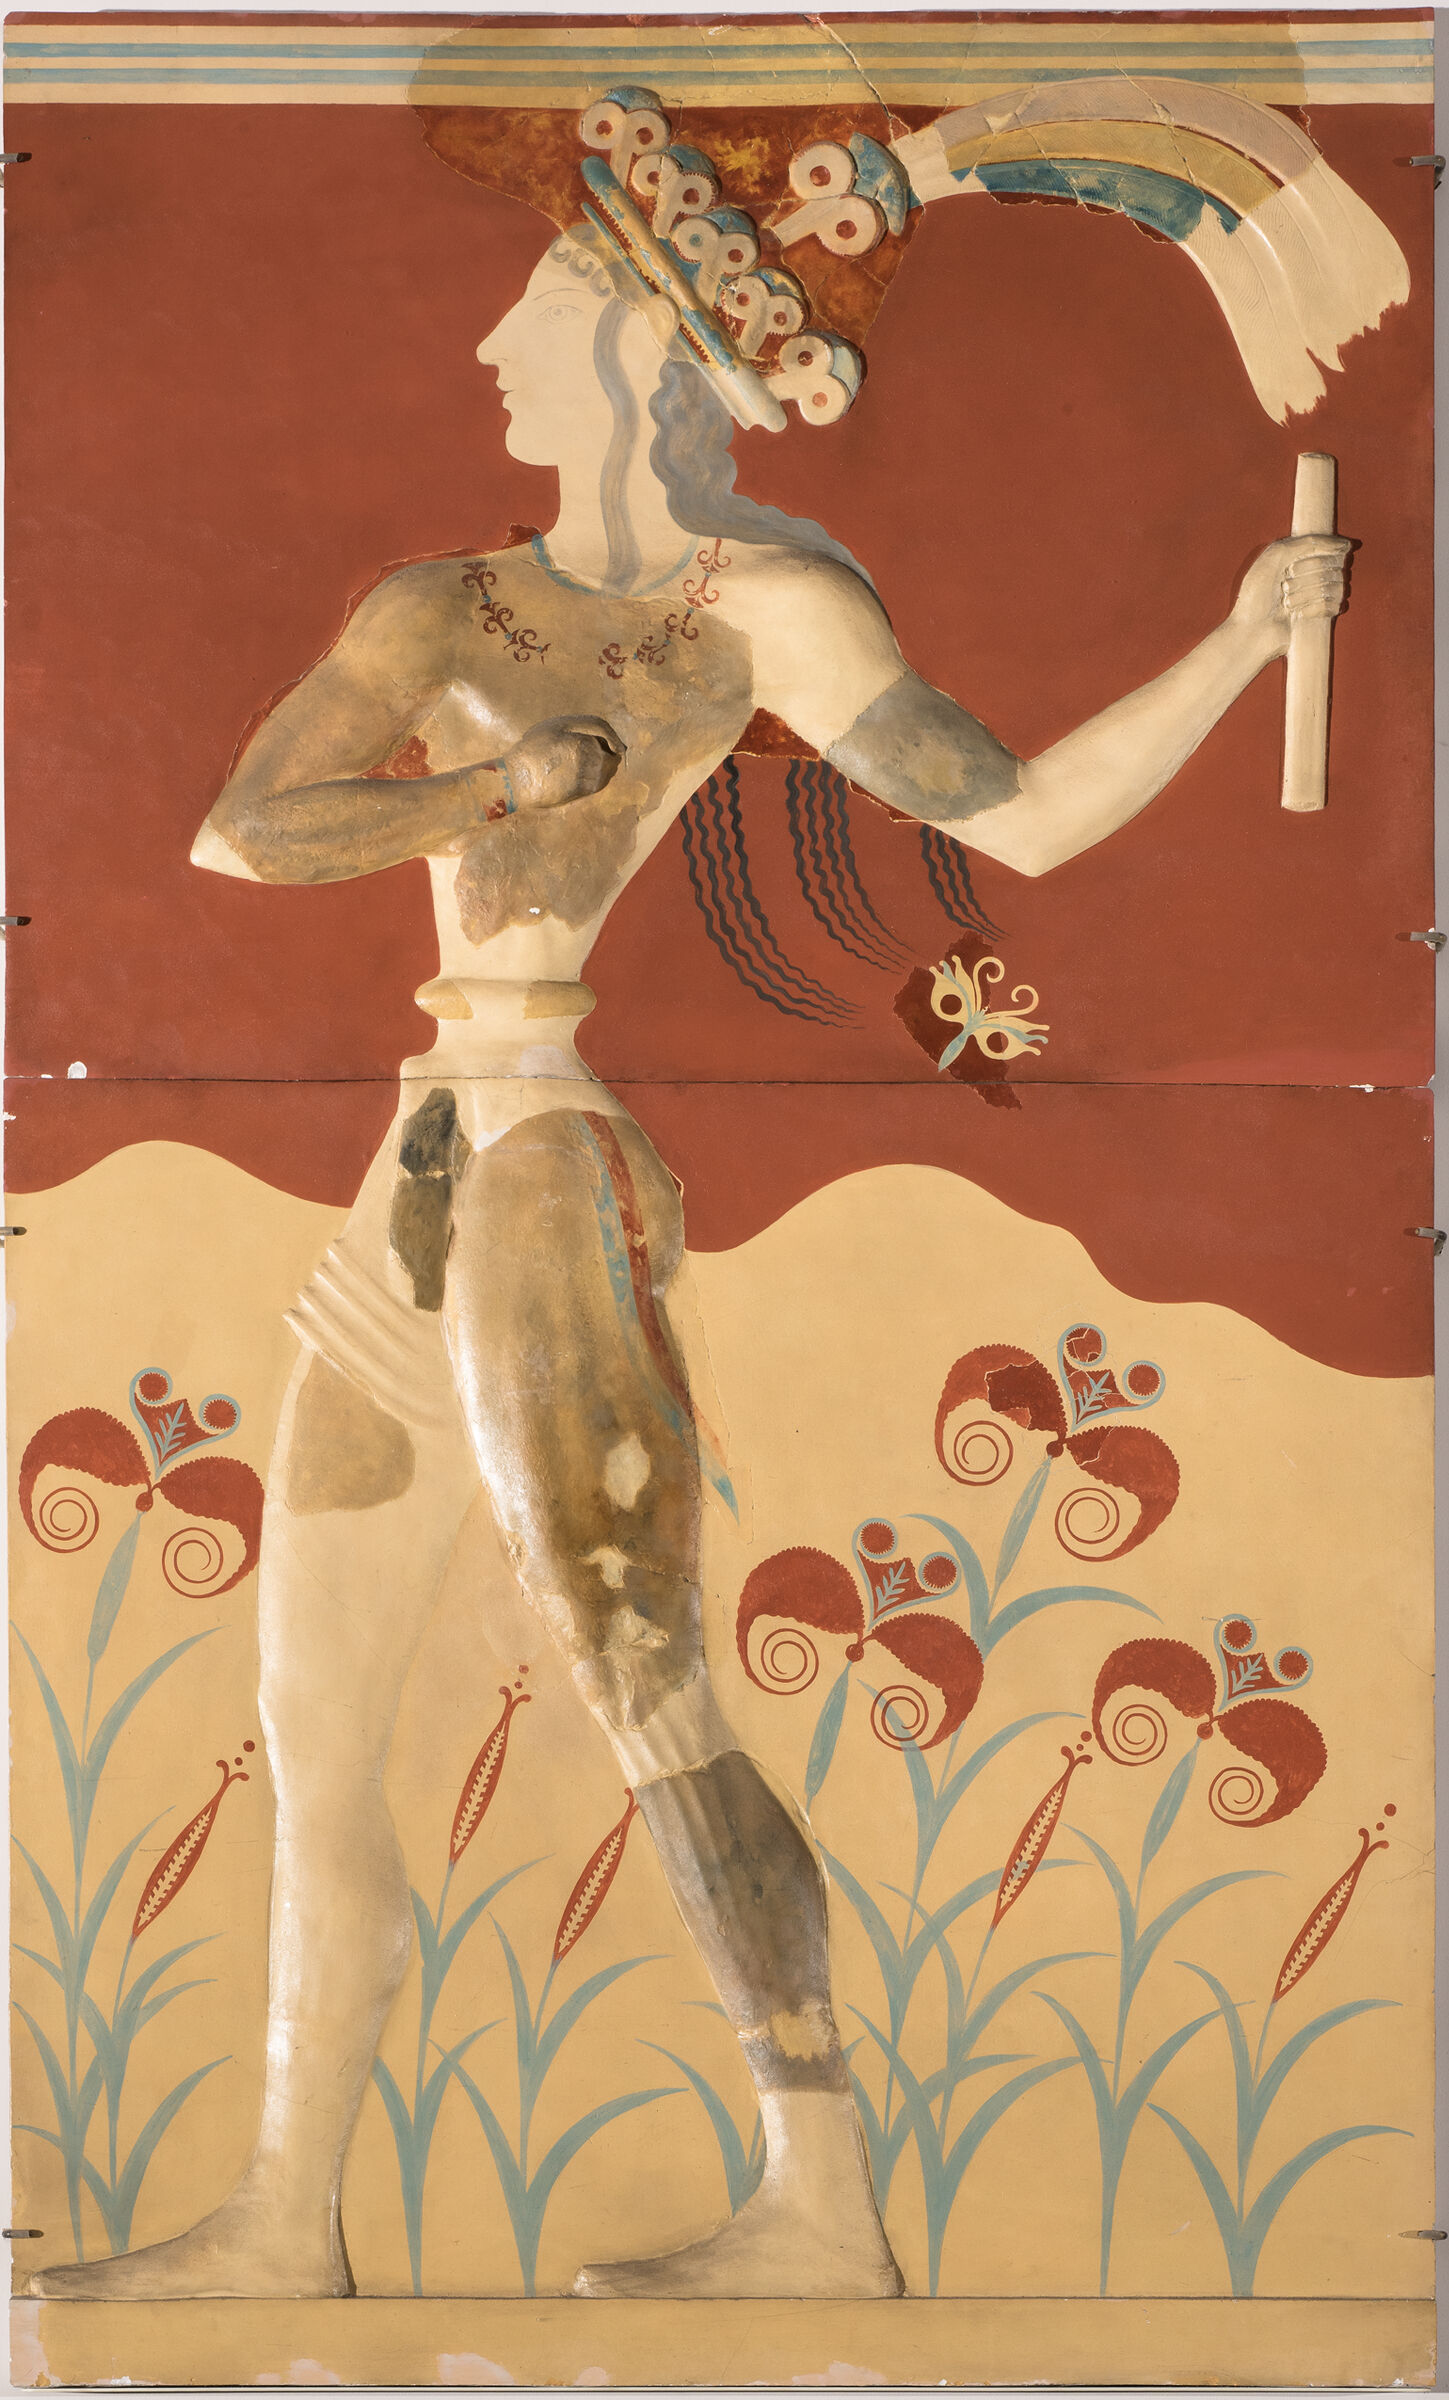 Priest King Or Lily Prince (Reproduction After A Relief From The Palace Of Knossos, Crete)